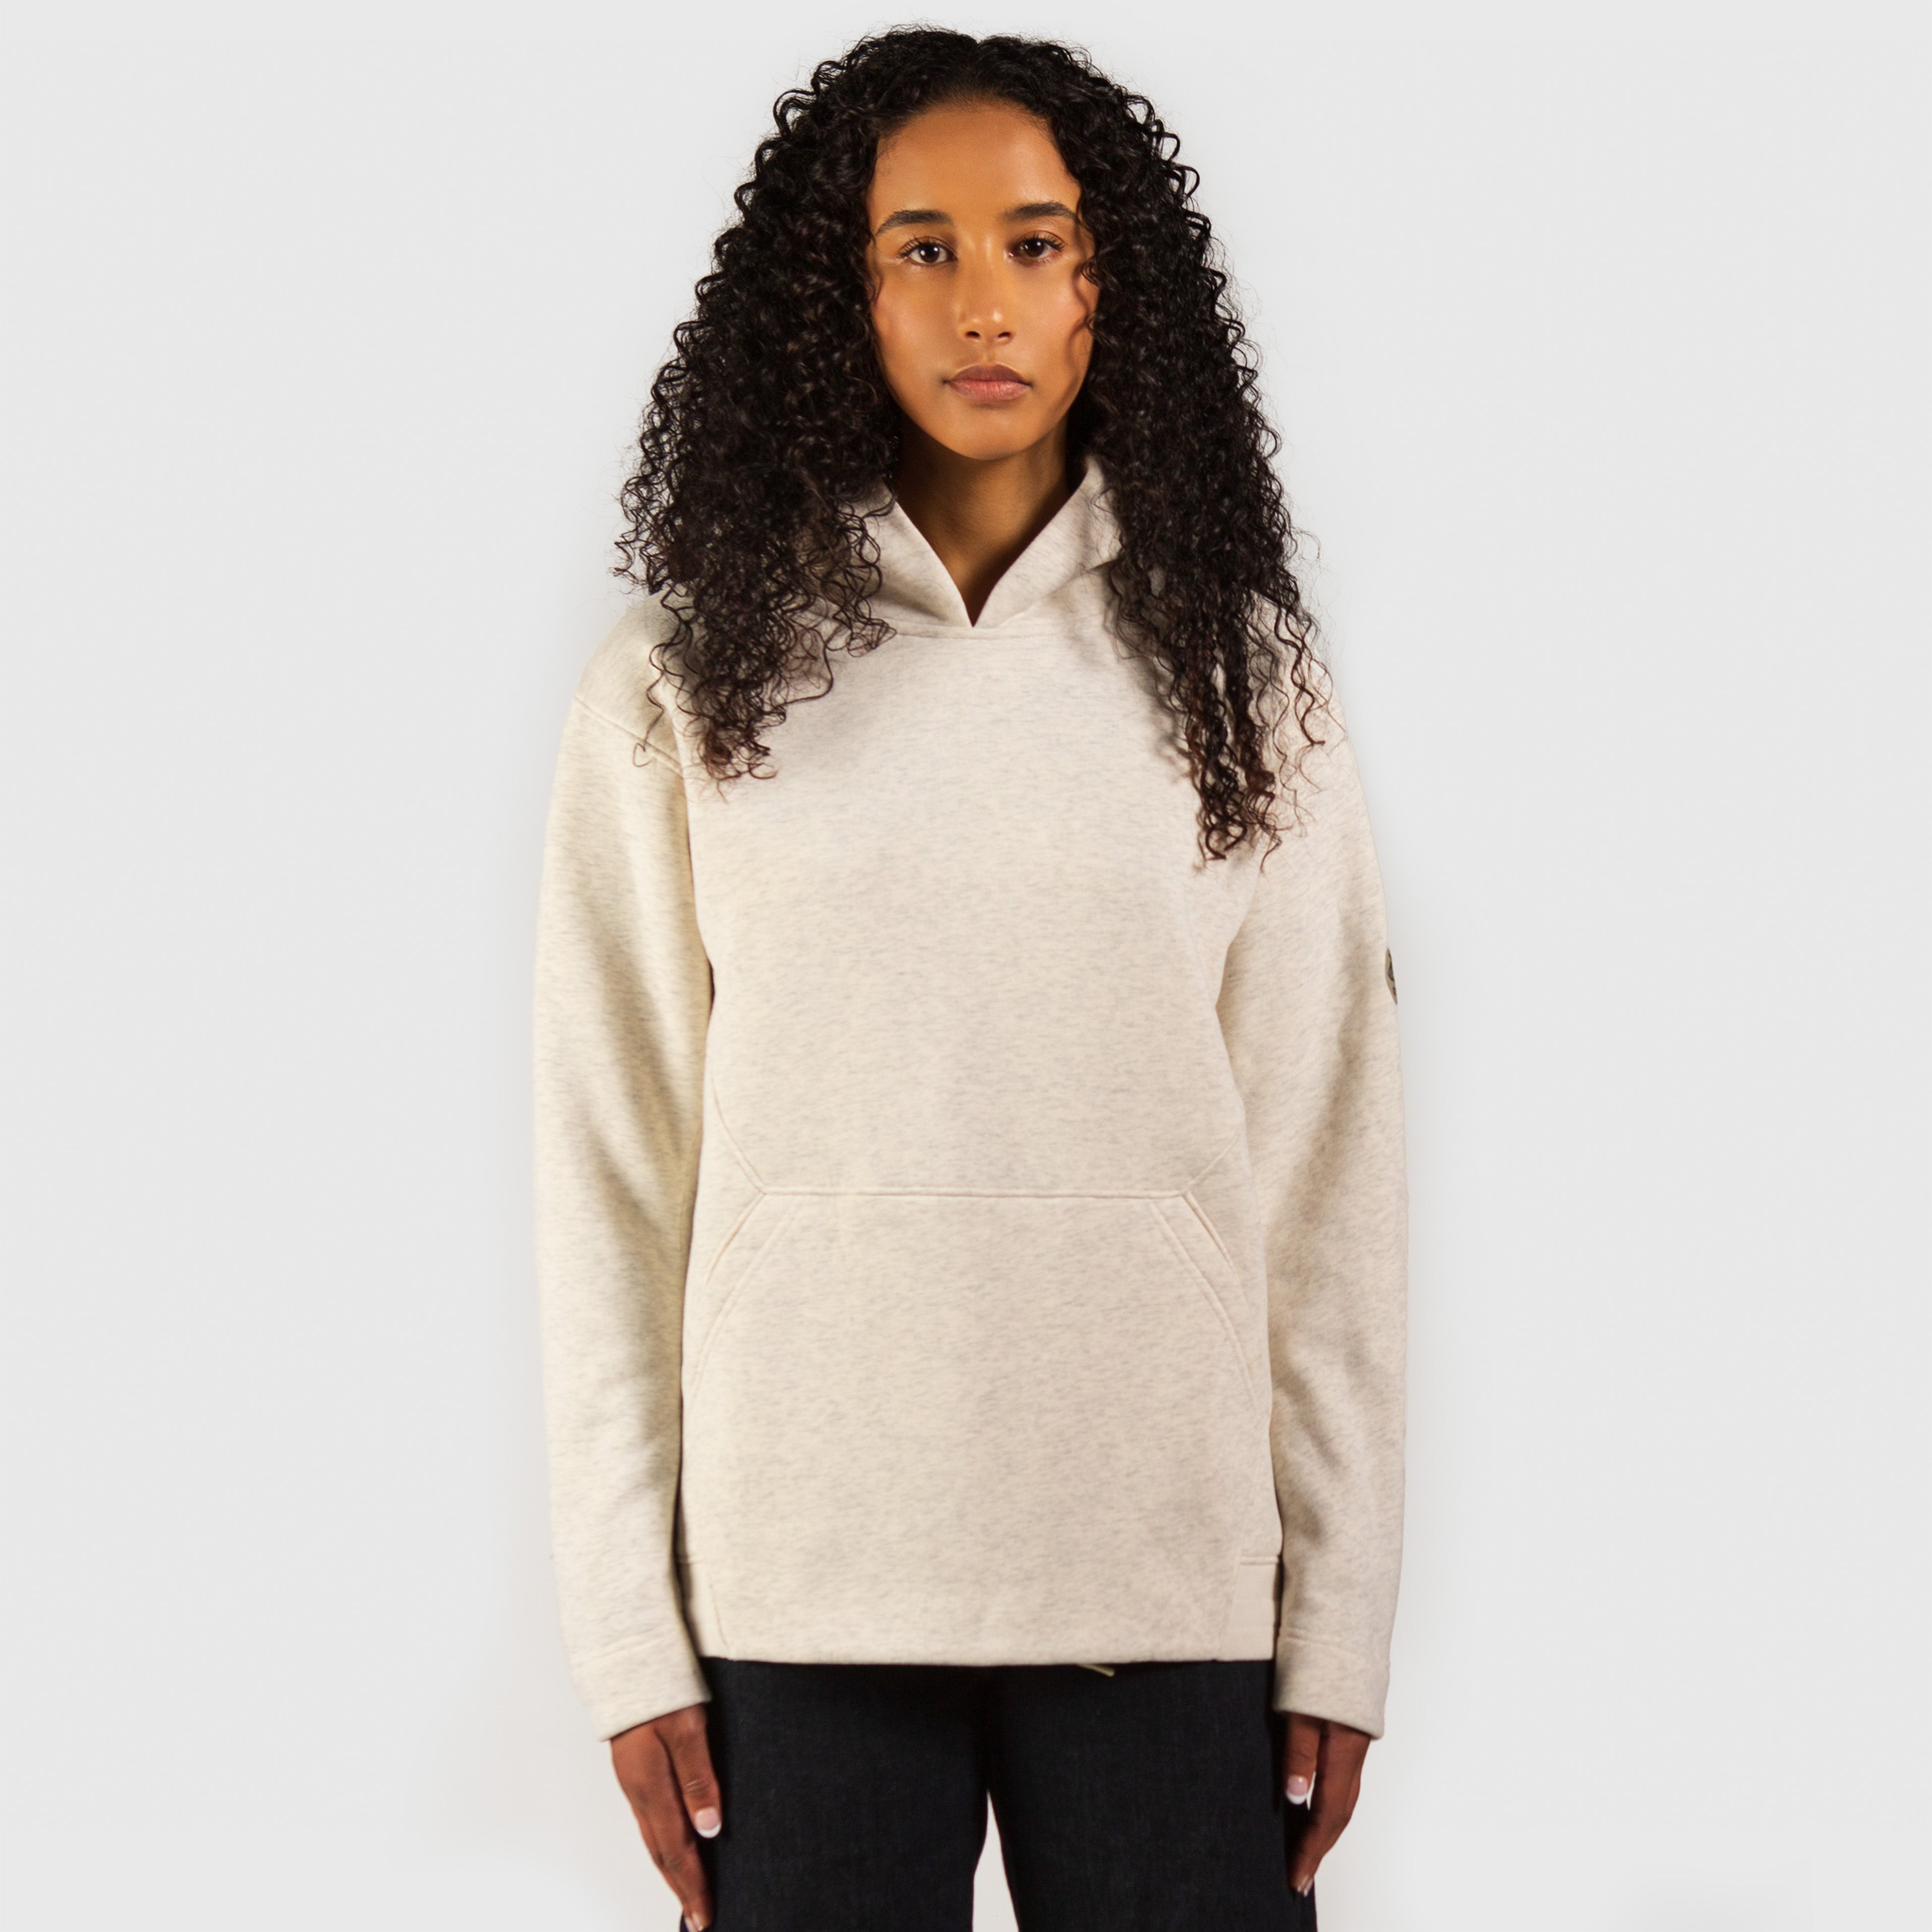 Delphine – Fleece Pull-over Hoodie in Offwhite Heather